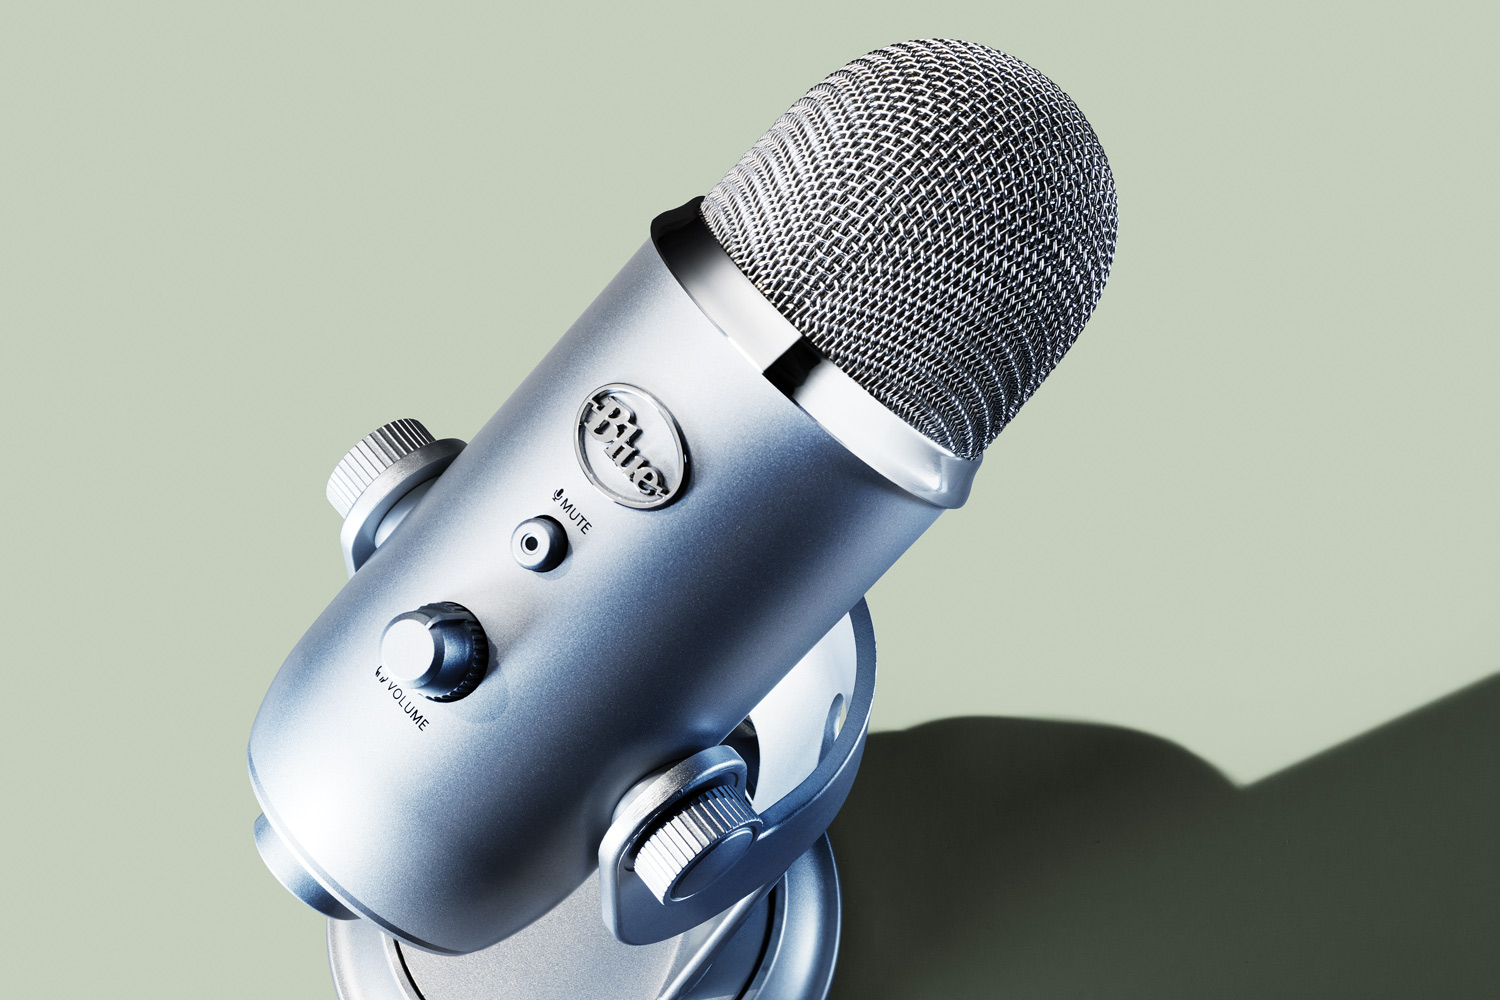 Essential gear to start your own podcast studio